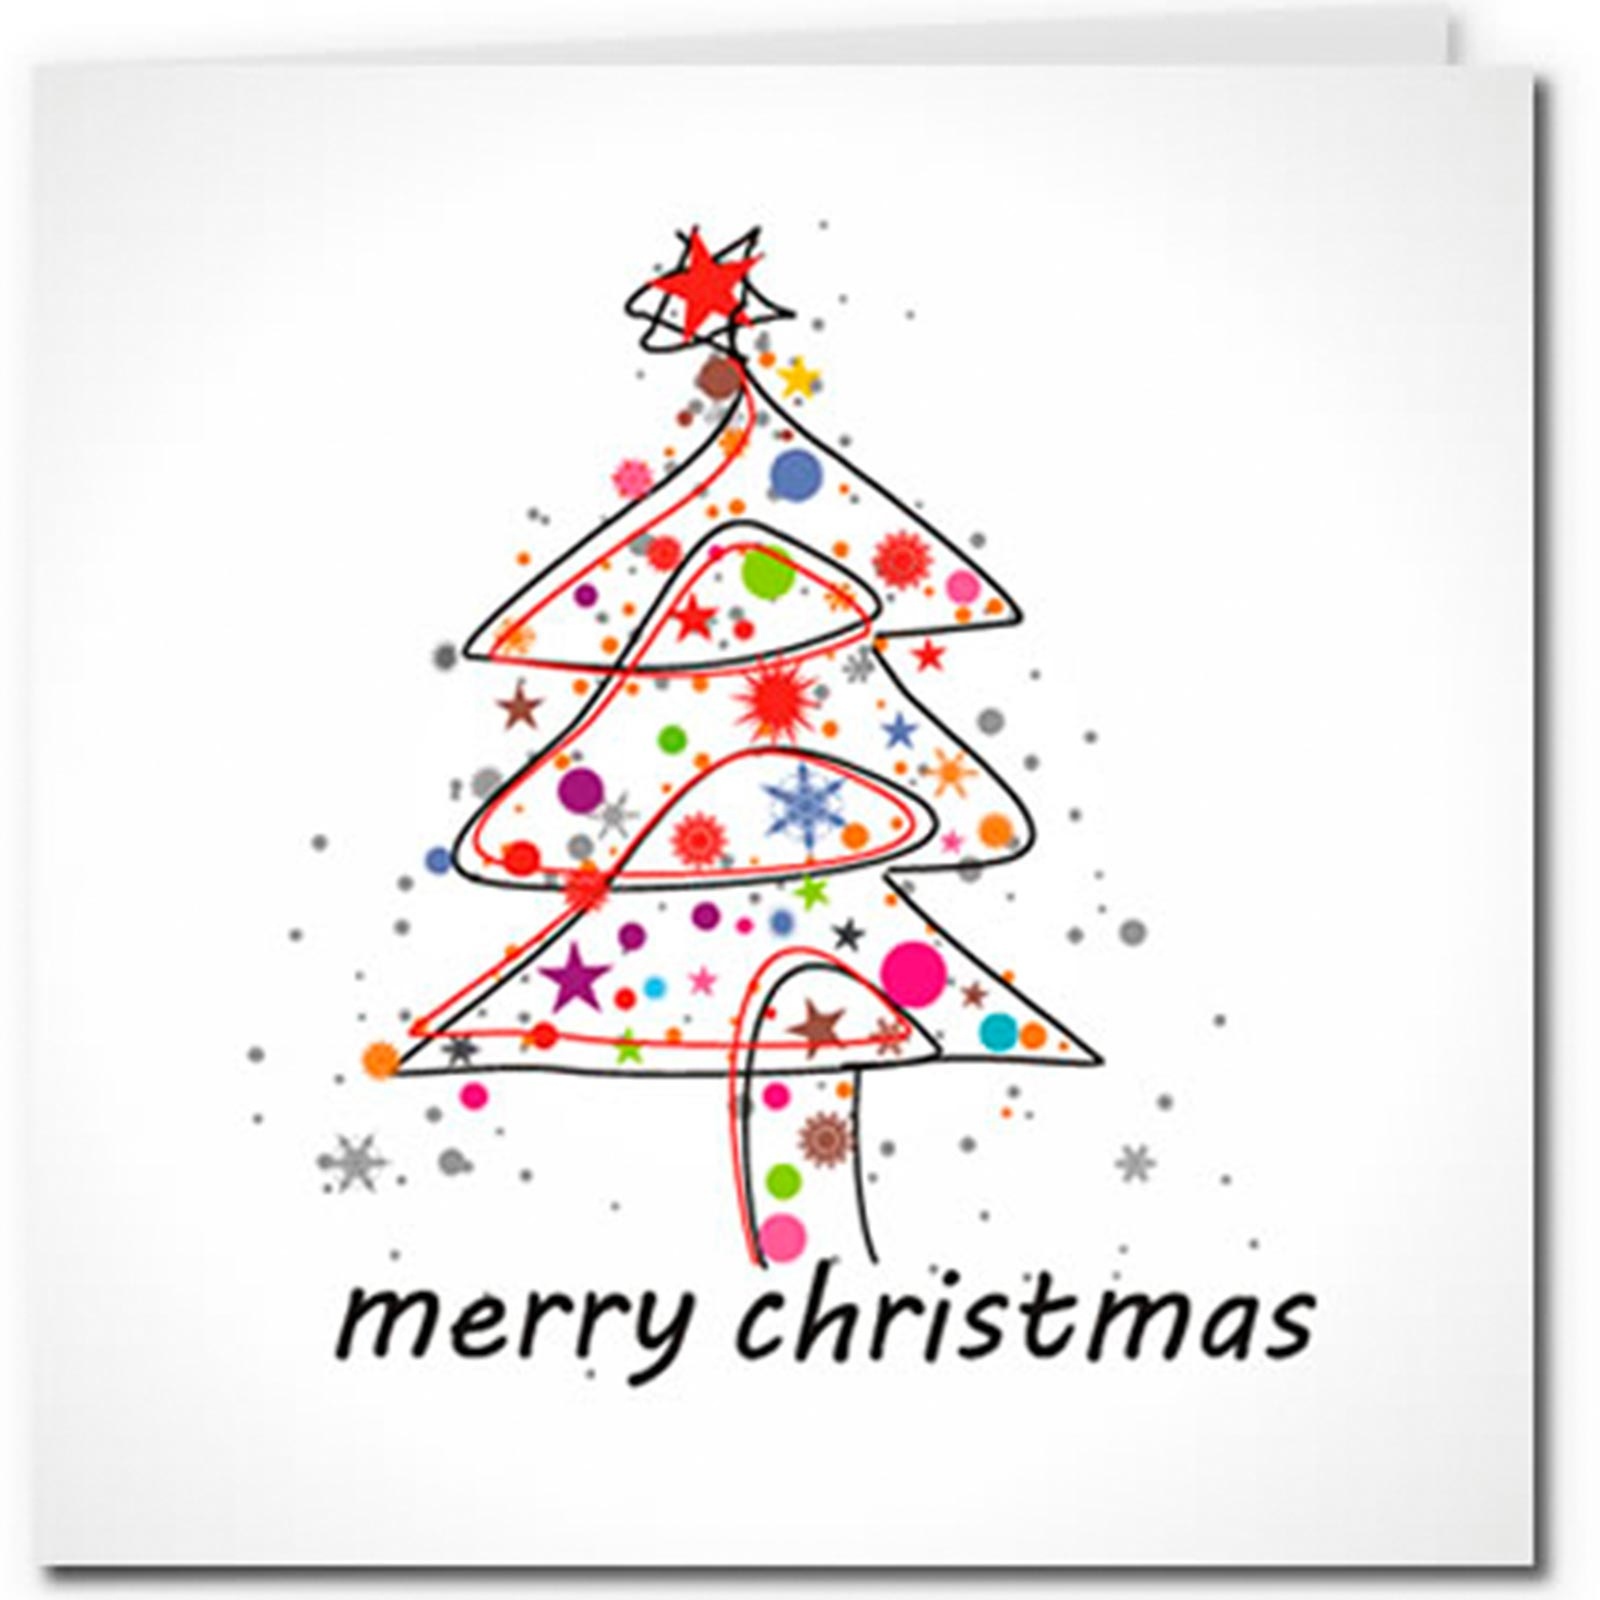 Free Christmas Cards To Print Out And Send This Year Reader s Digest 